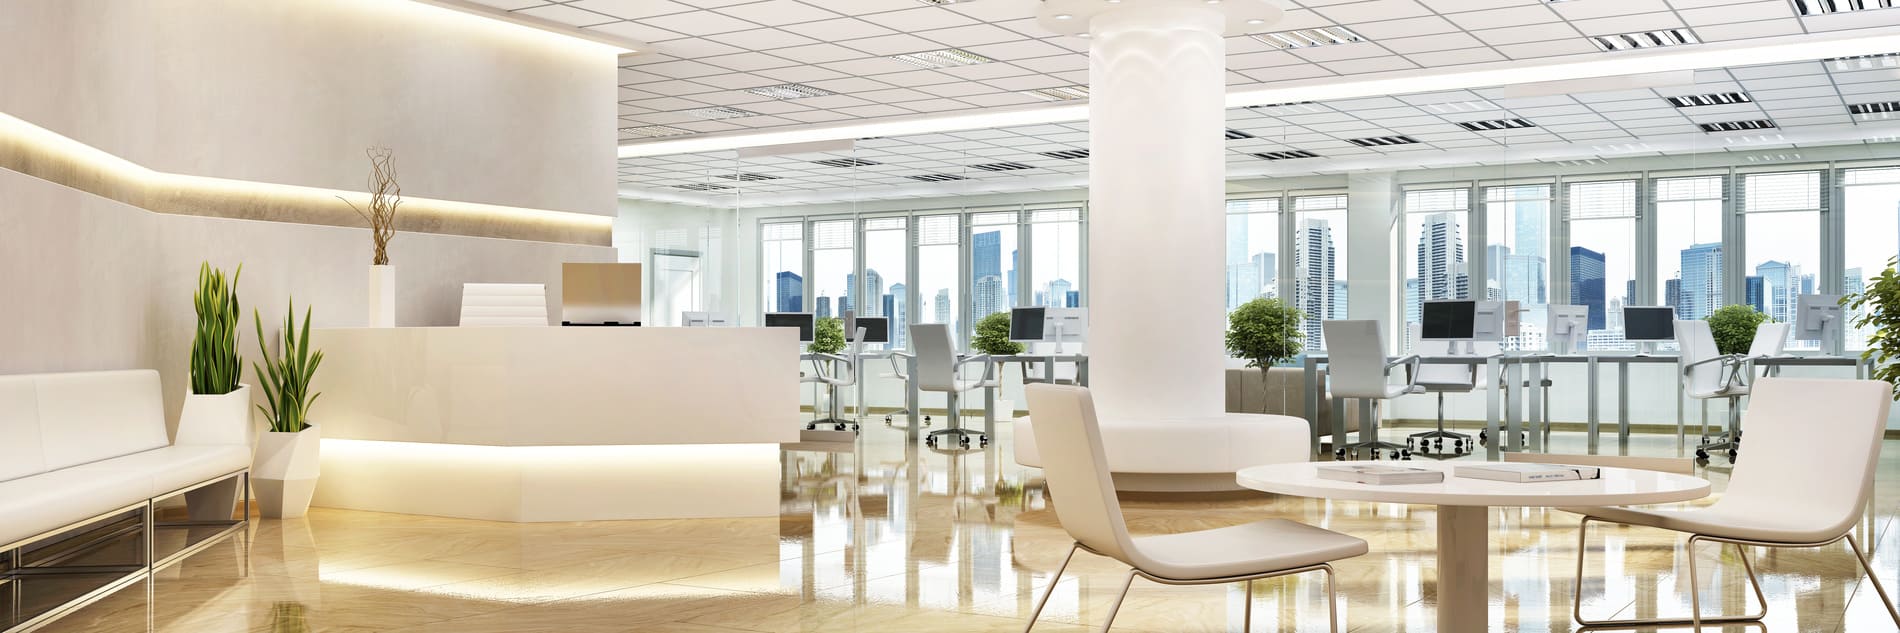 commercial cleaning office cleaning services chicago